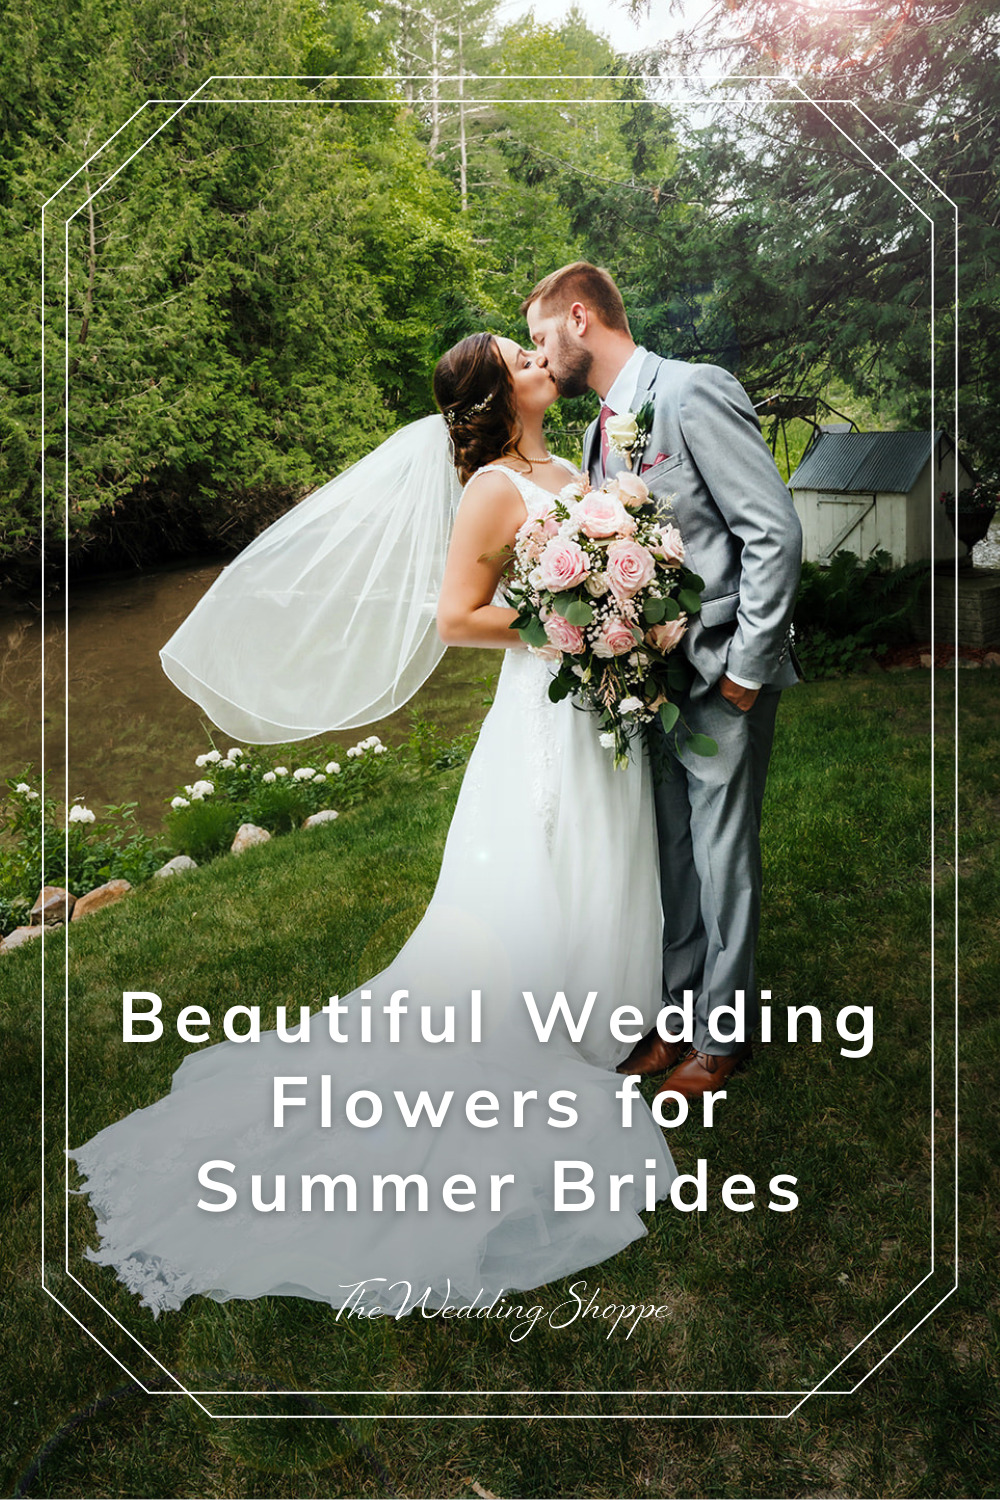 pinnable graphic for "Beautiful Wedding Flowers for Summer Brides" from The Wedding Shoppe